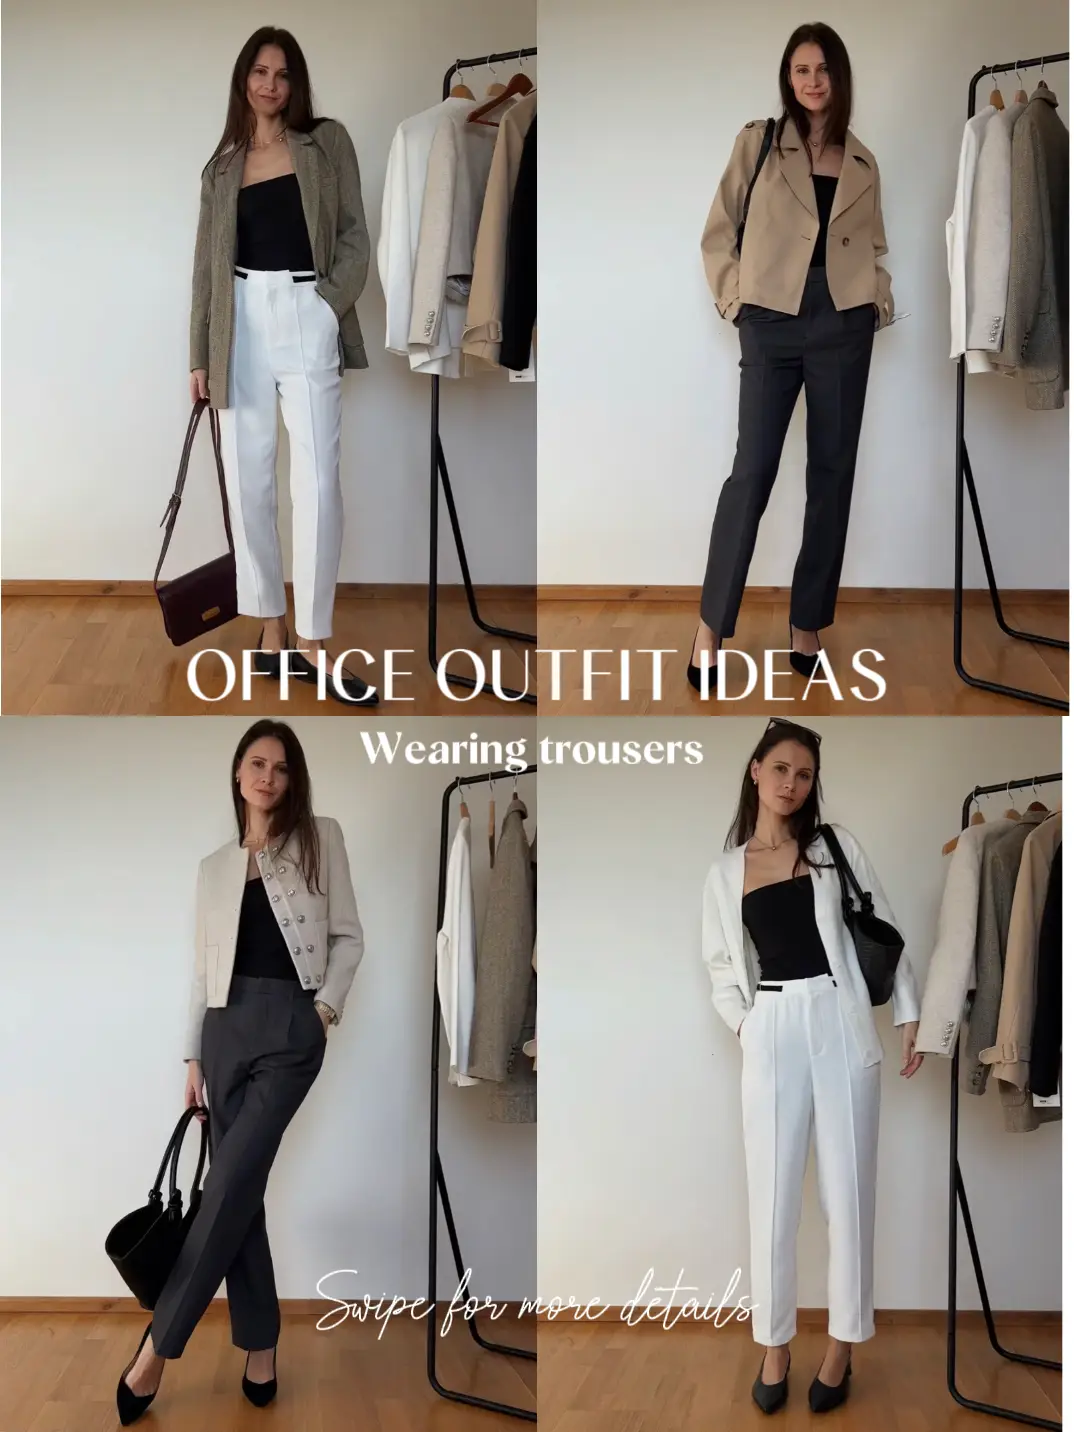 4 OFFICE outfit ideas, Gallery posted by viktorijaB